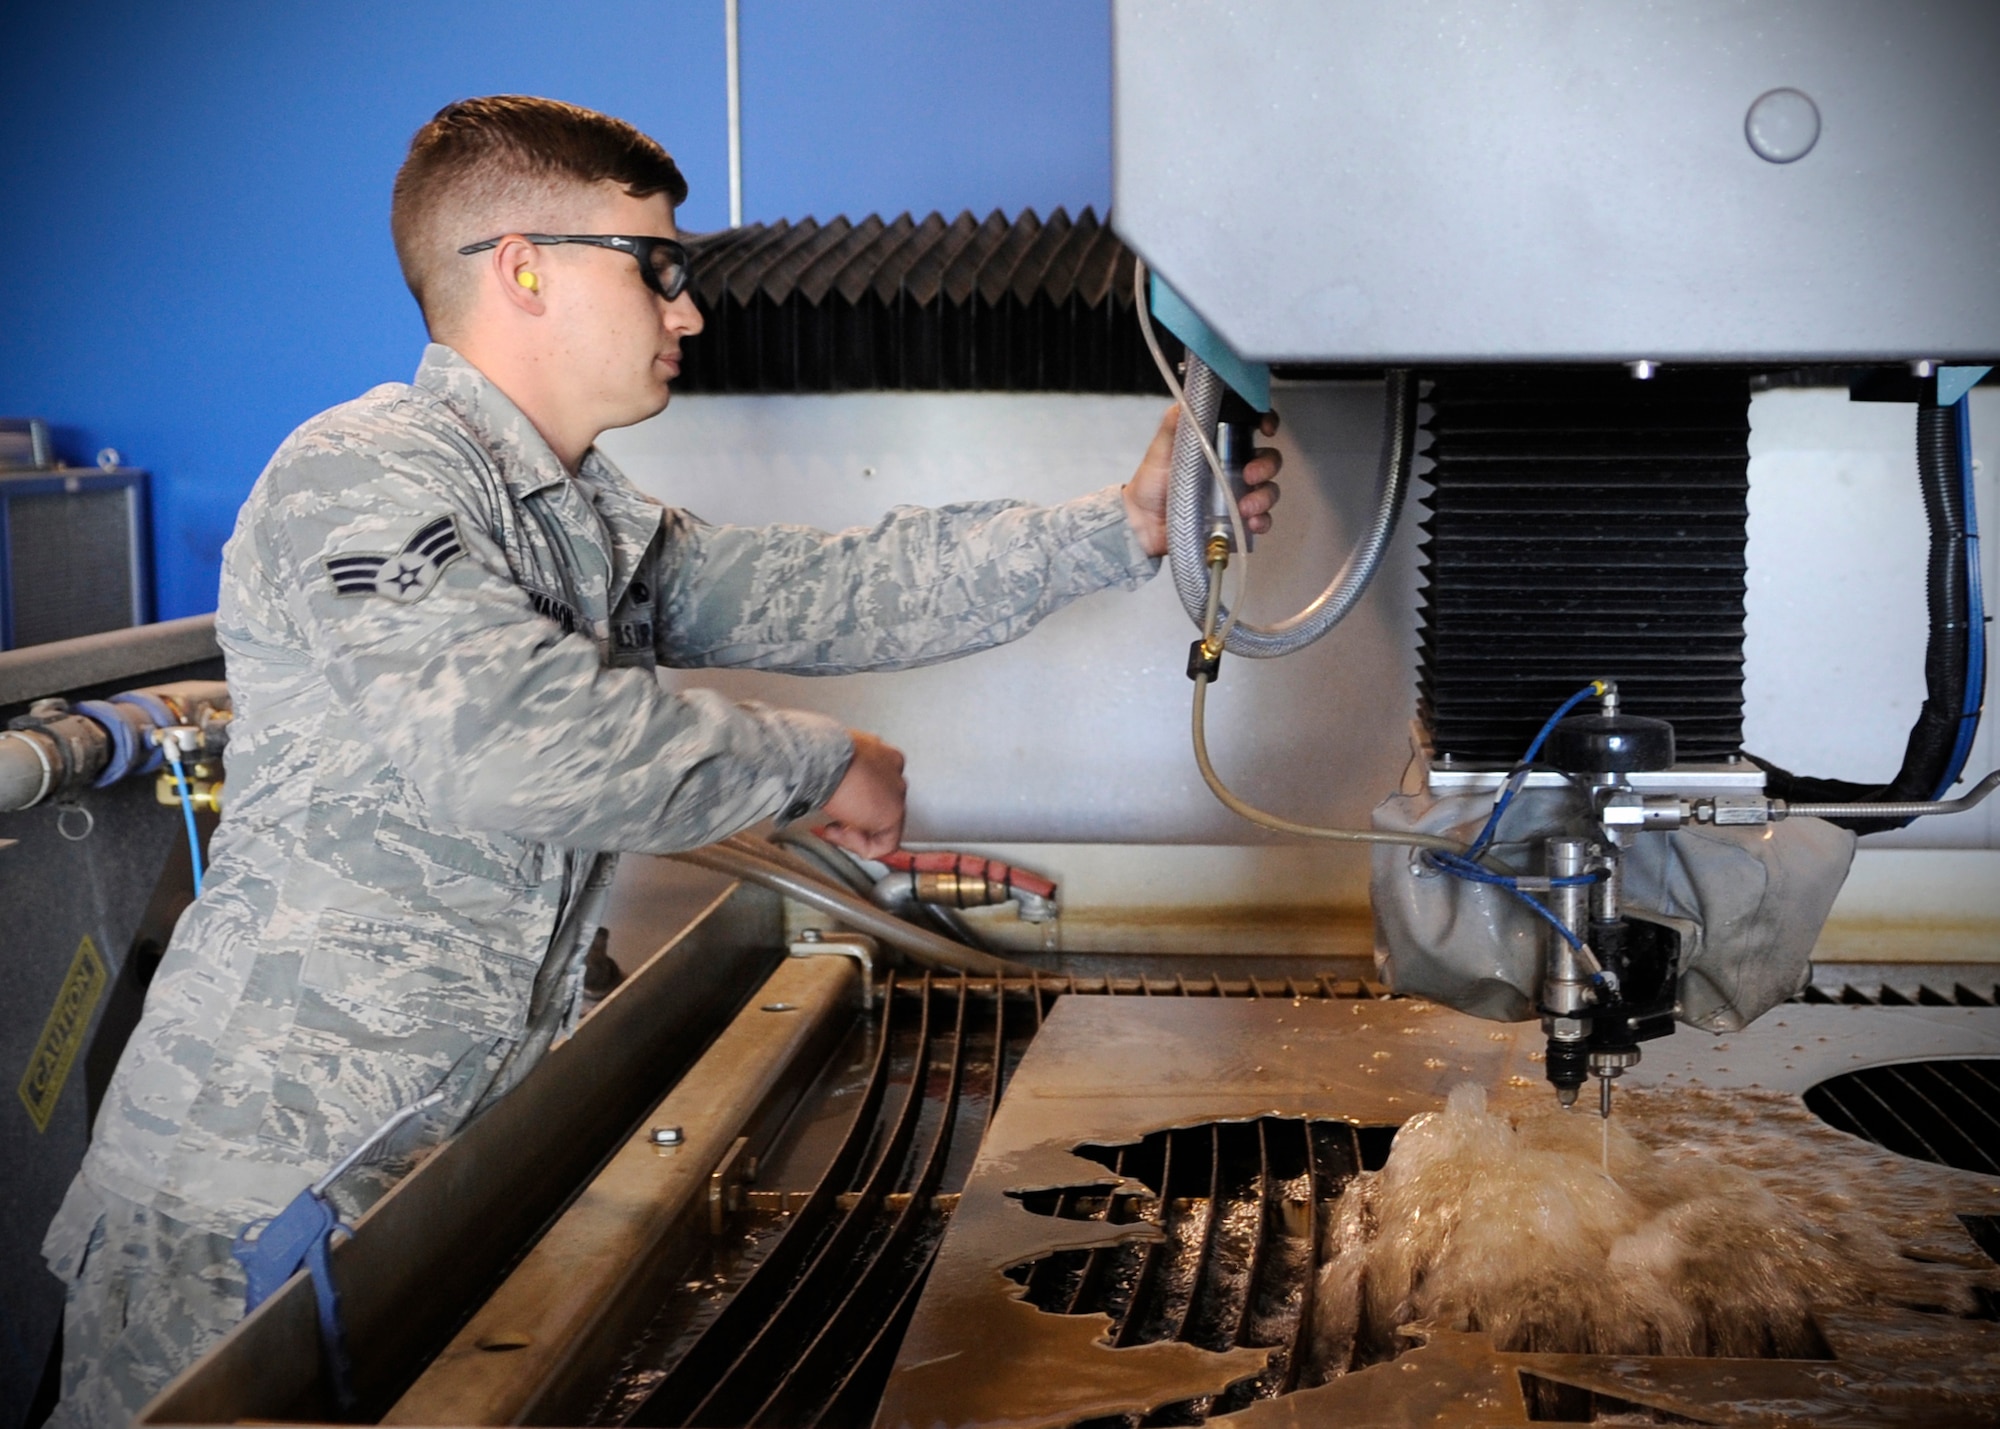 U.S. Air Force Senior Airman Robert Mason, 354th Maintenance Squadron metals technology journeyman, makes adjustments to a water jet while fabricating fuel caps for F-16 Fighting Falcons at Eielson Air Force Base, Alaska, July 22, 2013. Metals tech Airmen are certified to run the machine, which pierces metal with 55,000 pounds per square inch using water and an abrasive mixture. (U.S. Air Force Senior Airman Shawn Nickel/Released)